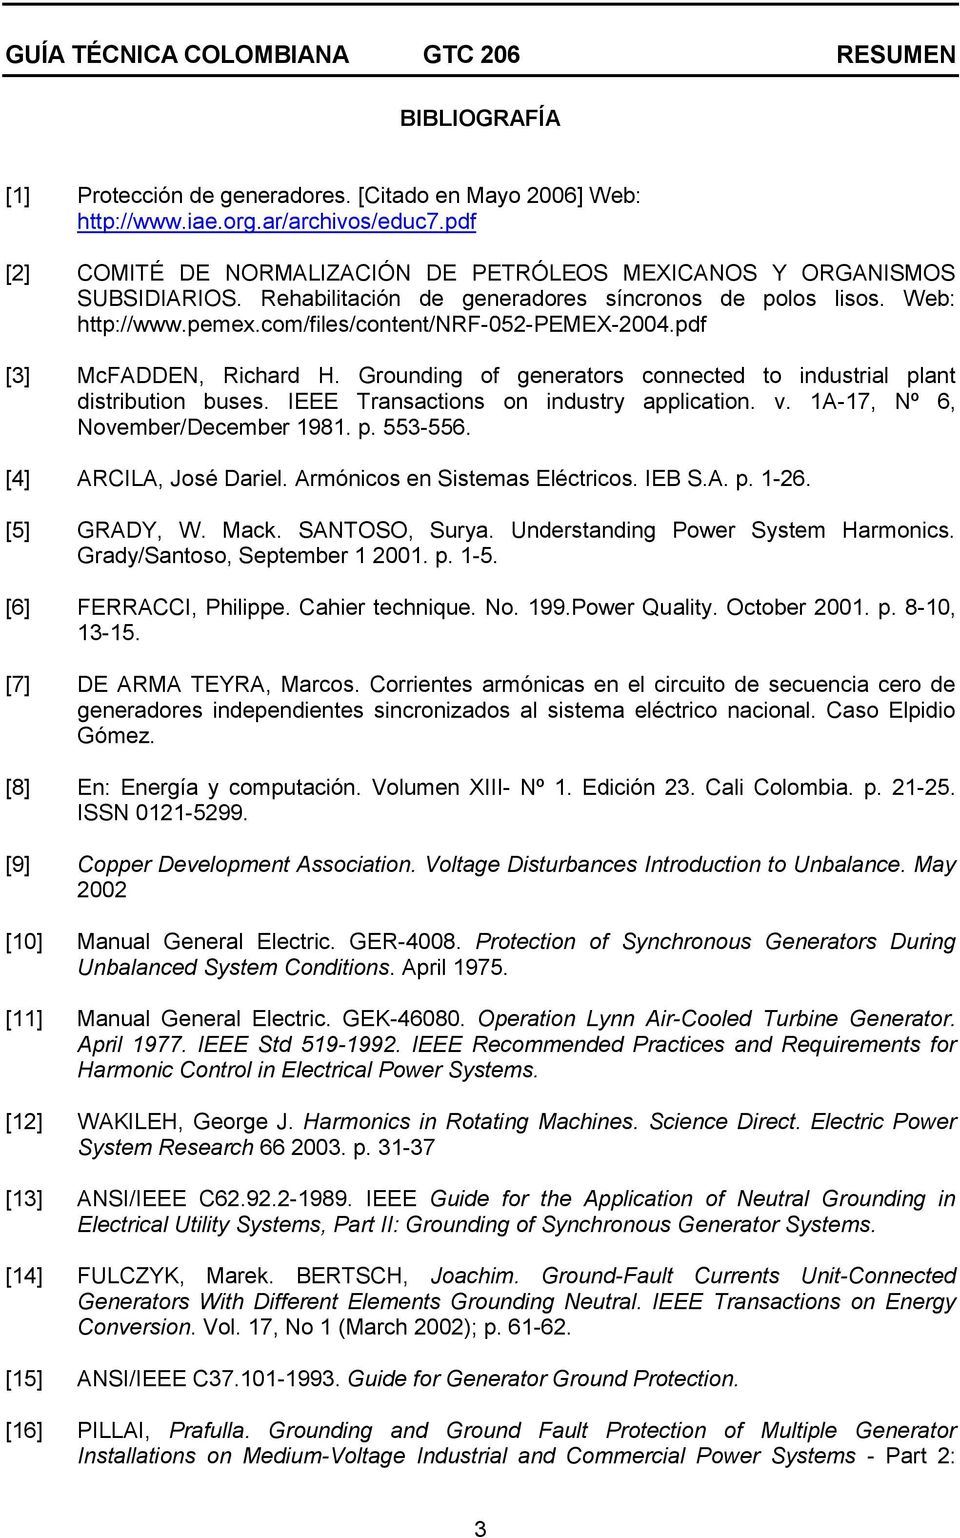 Grounding of generators connected to industrial plant distribution buses. IEEE Transactions on industry application. v. 1A-17, Nº 6, November/December 1981. p. 553-556. [4] ARCILA, José Dariel.